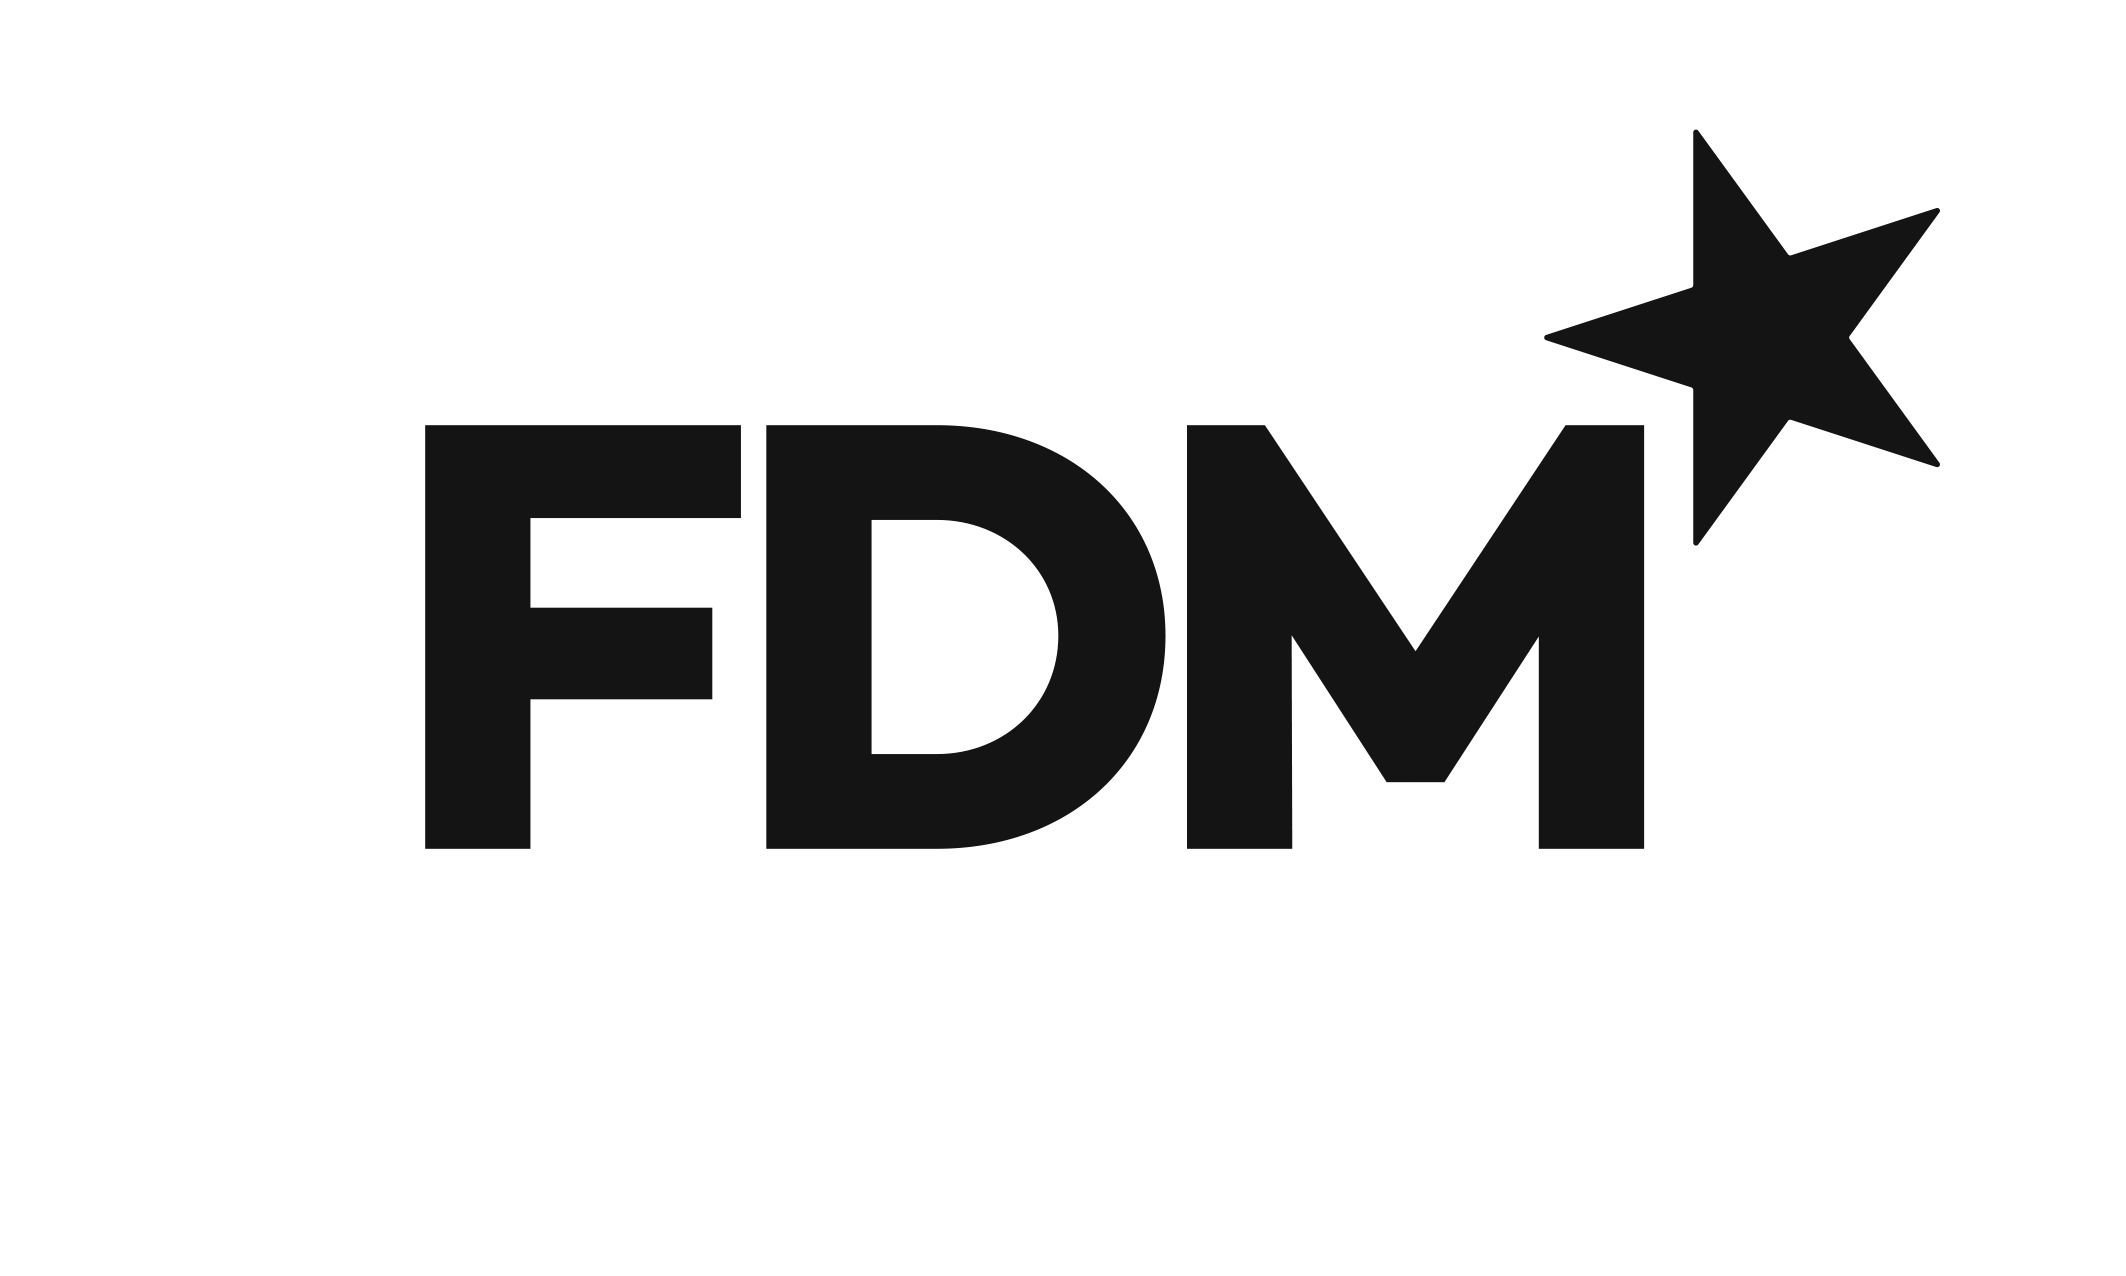 Armed Forces Expo Oxford – Meet The Exhibitors – FDM Group